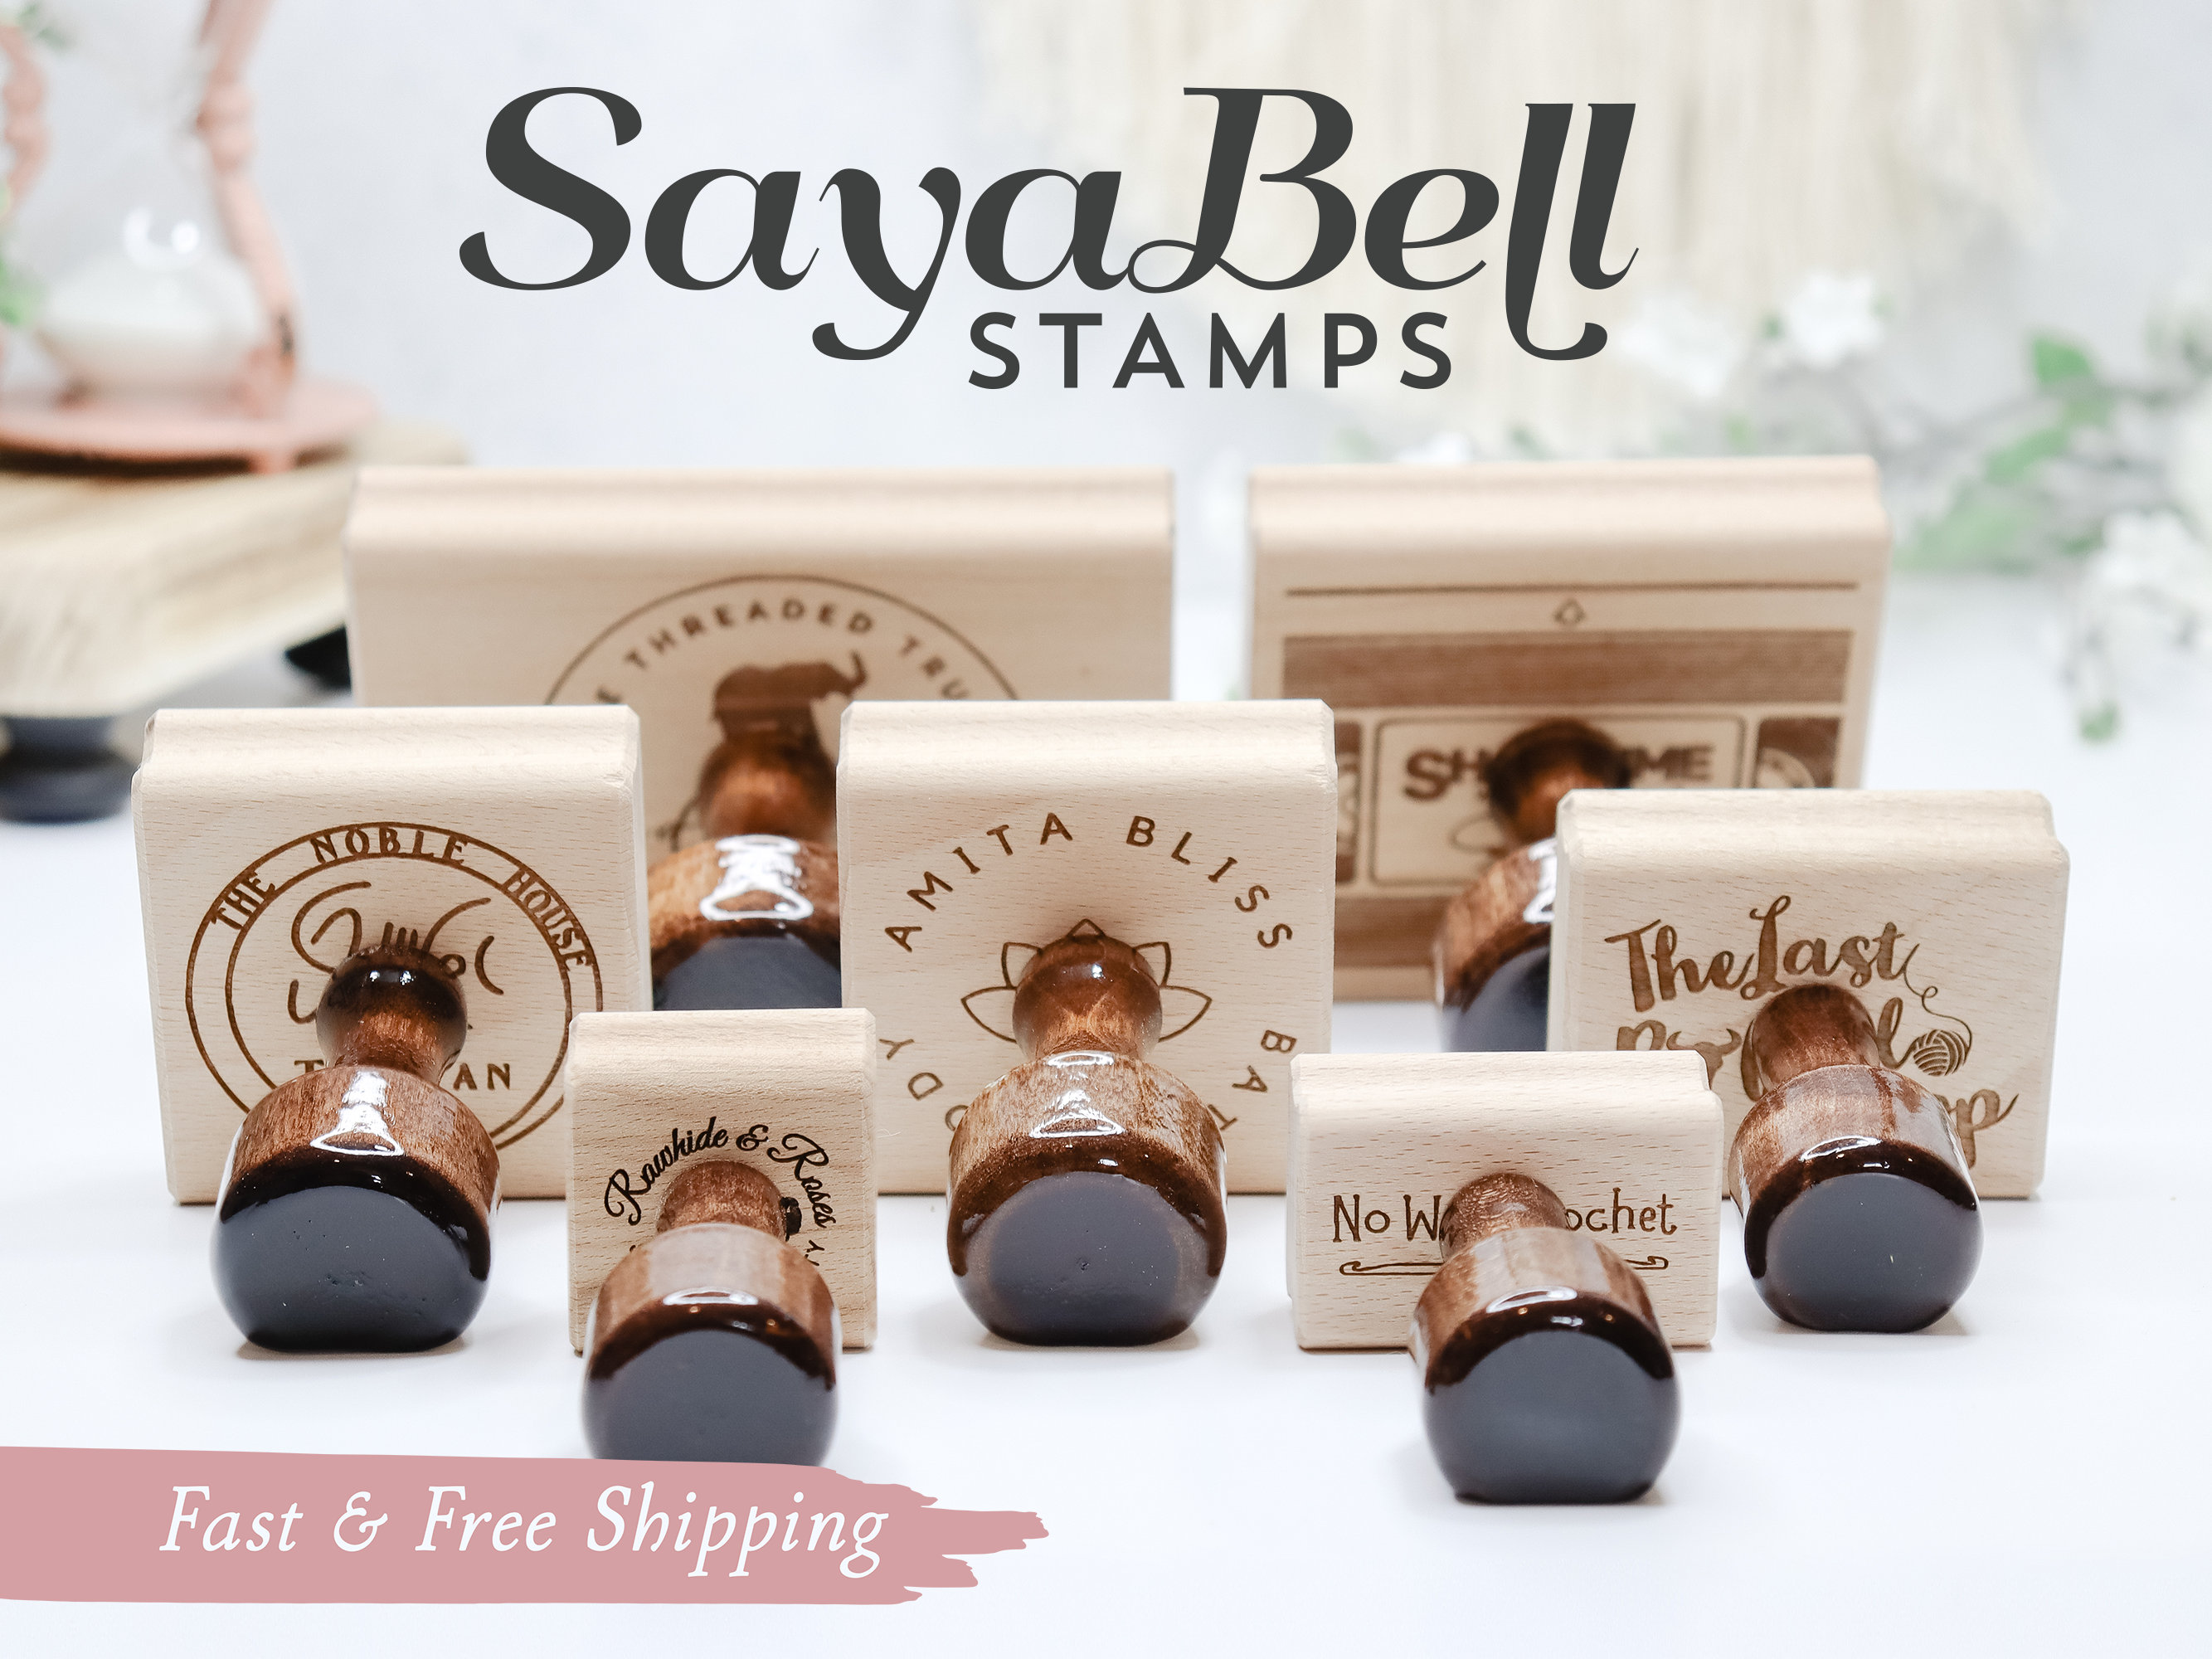 Rustic DIY Wedding Stamp with Antlers. Save The Date Rubber Stamp, Cus –  SayaBell Stamps